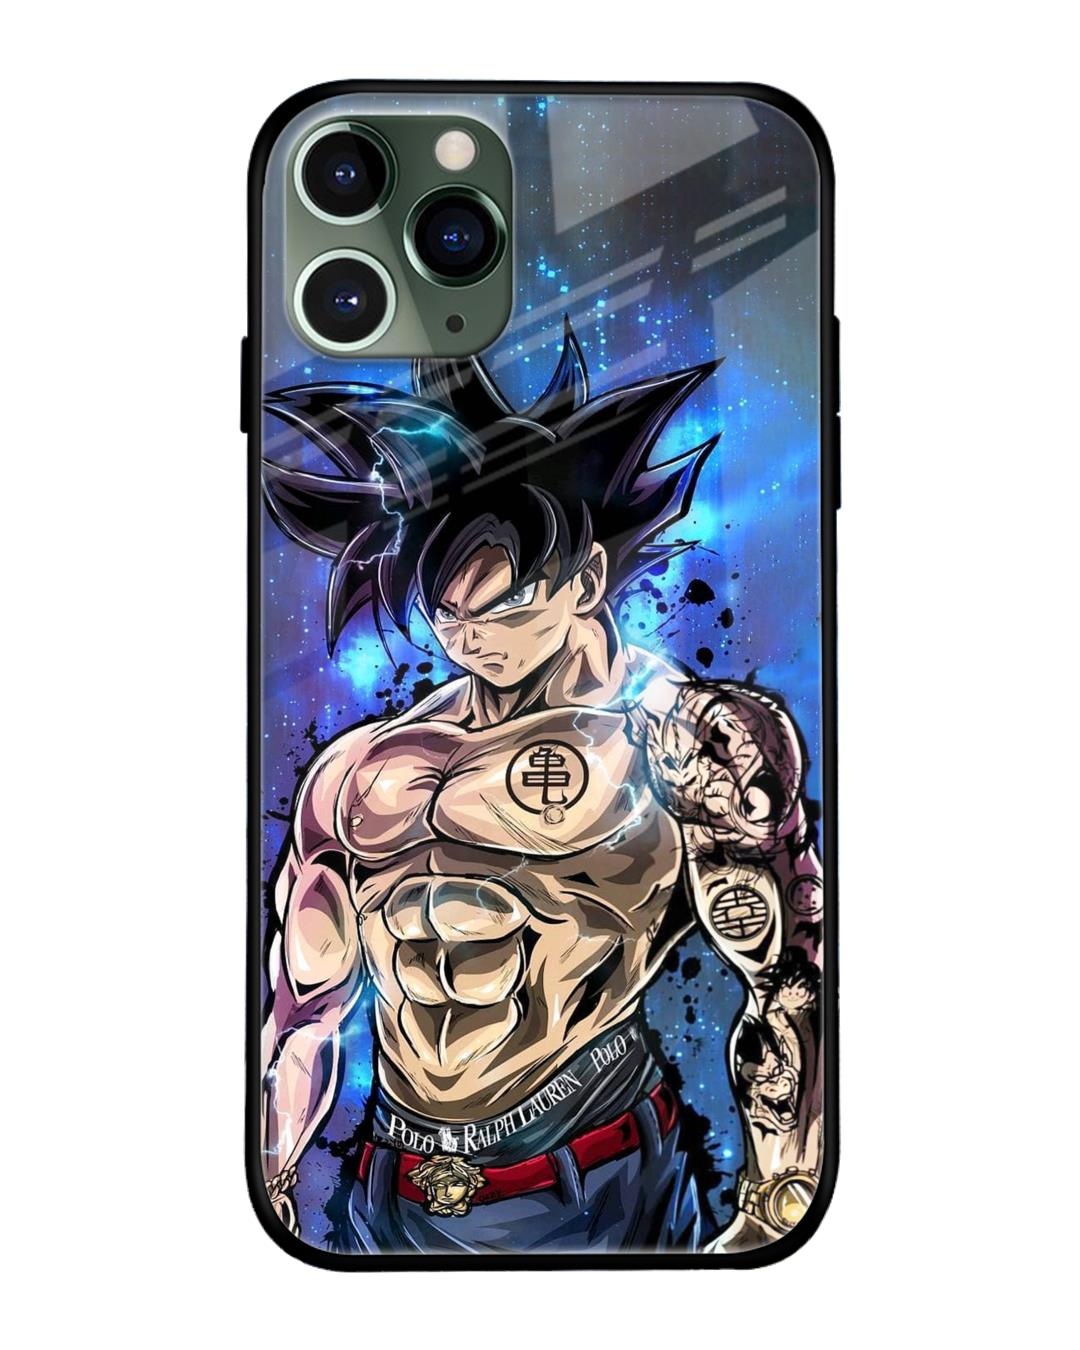 ONE PIECE PHONE CASE  LUFFY PHONE CASE  BEST ANIME PHONE CASE iPhone Case  for Sale by allwhatiwant4  Redbubble